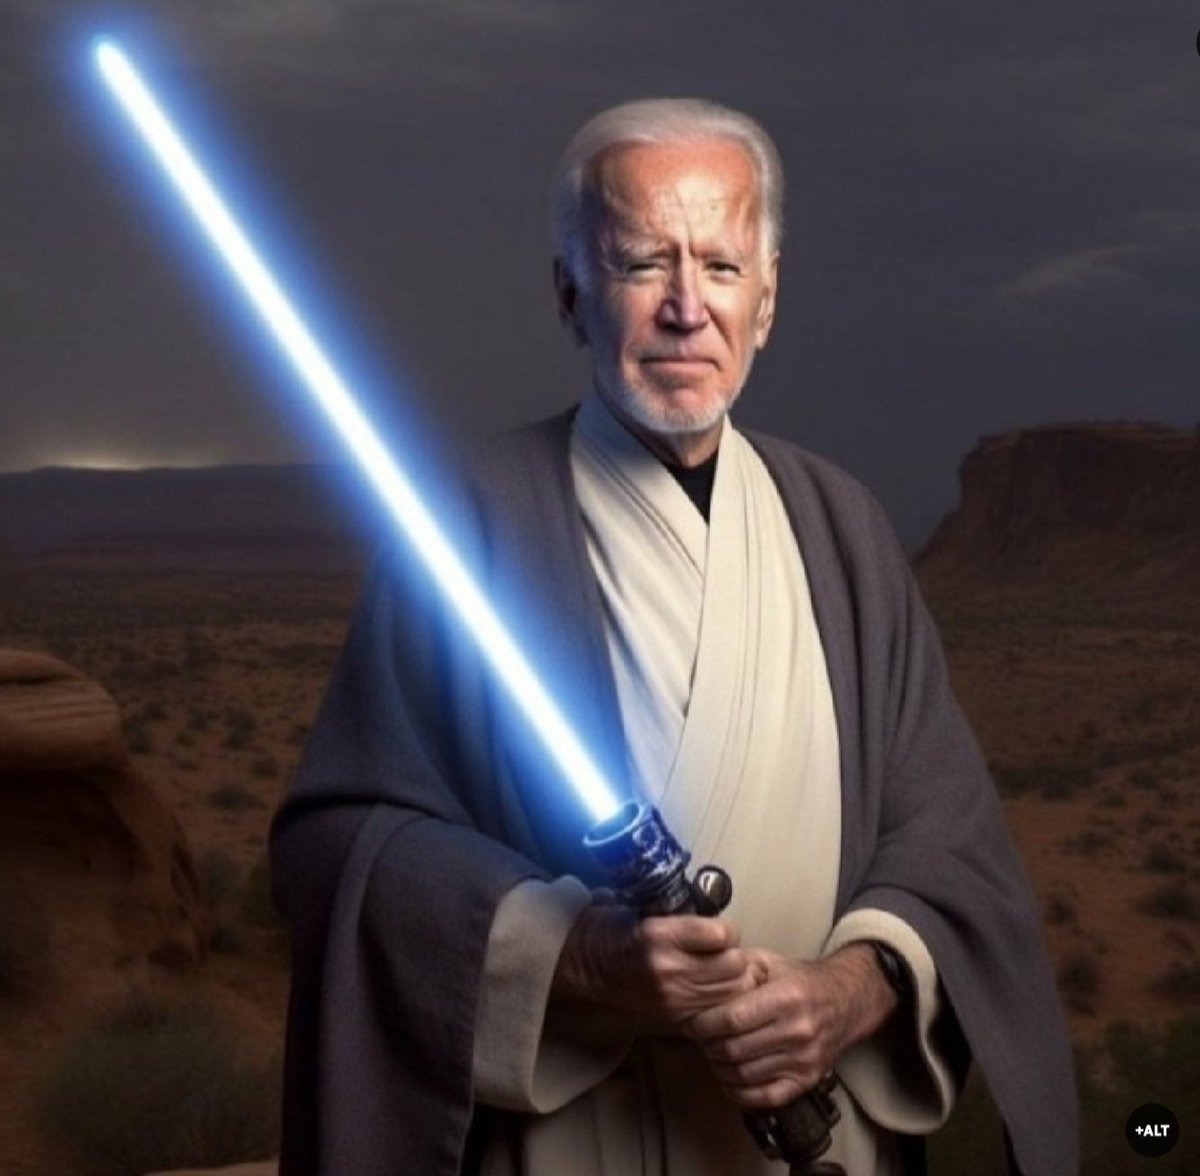 Master Joe-bi Wan says, 'Vote Democratic, and may the Fourth be with you!'

#VoteBIGBlue.  #DemVoice1